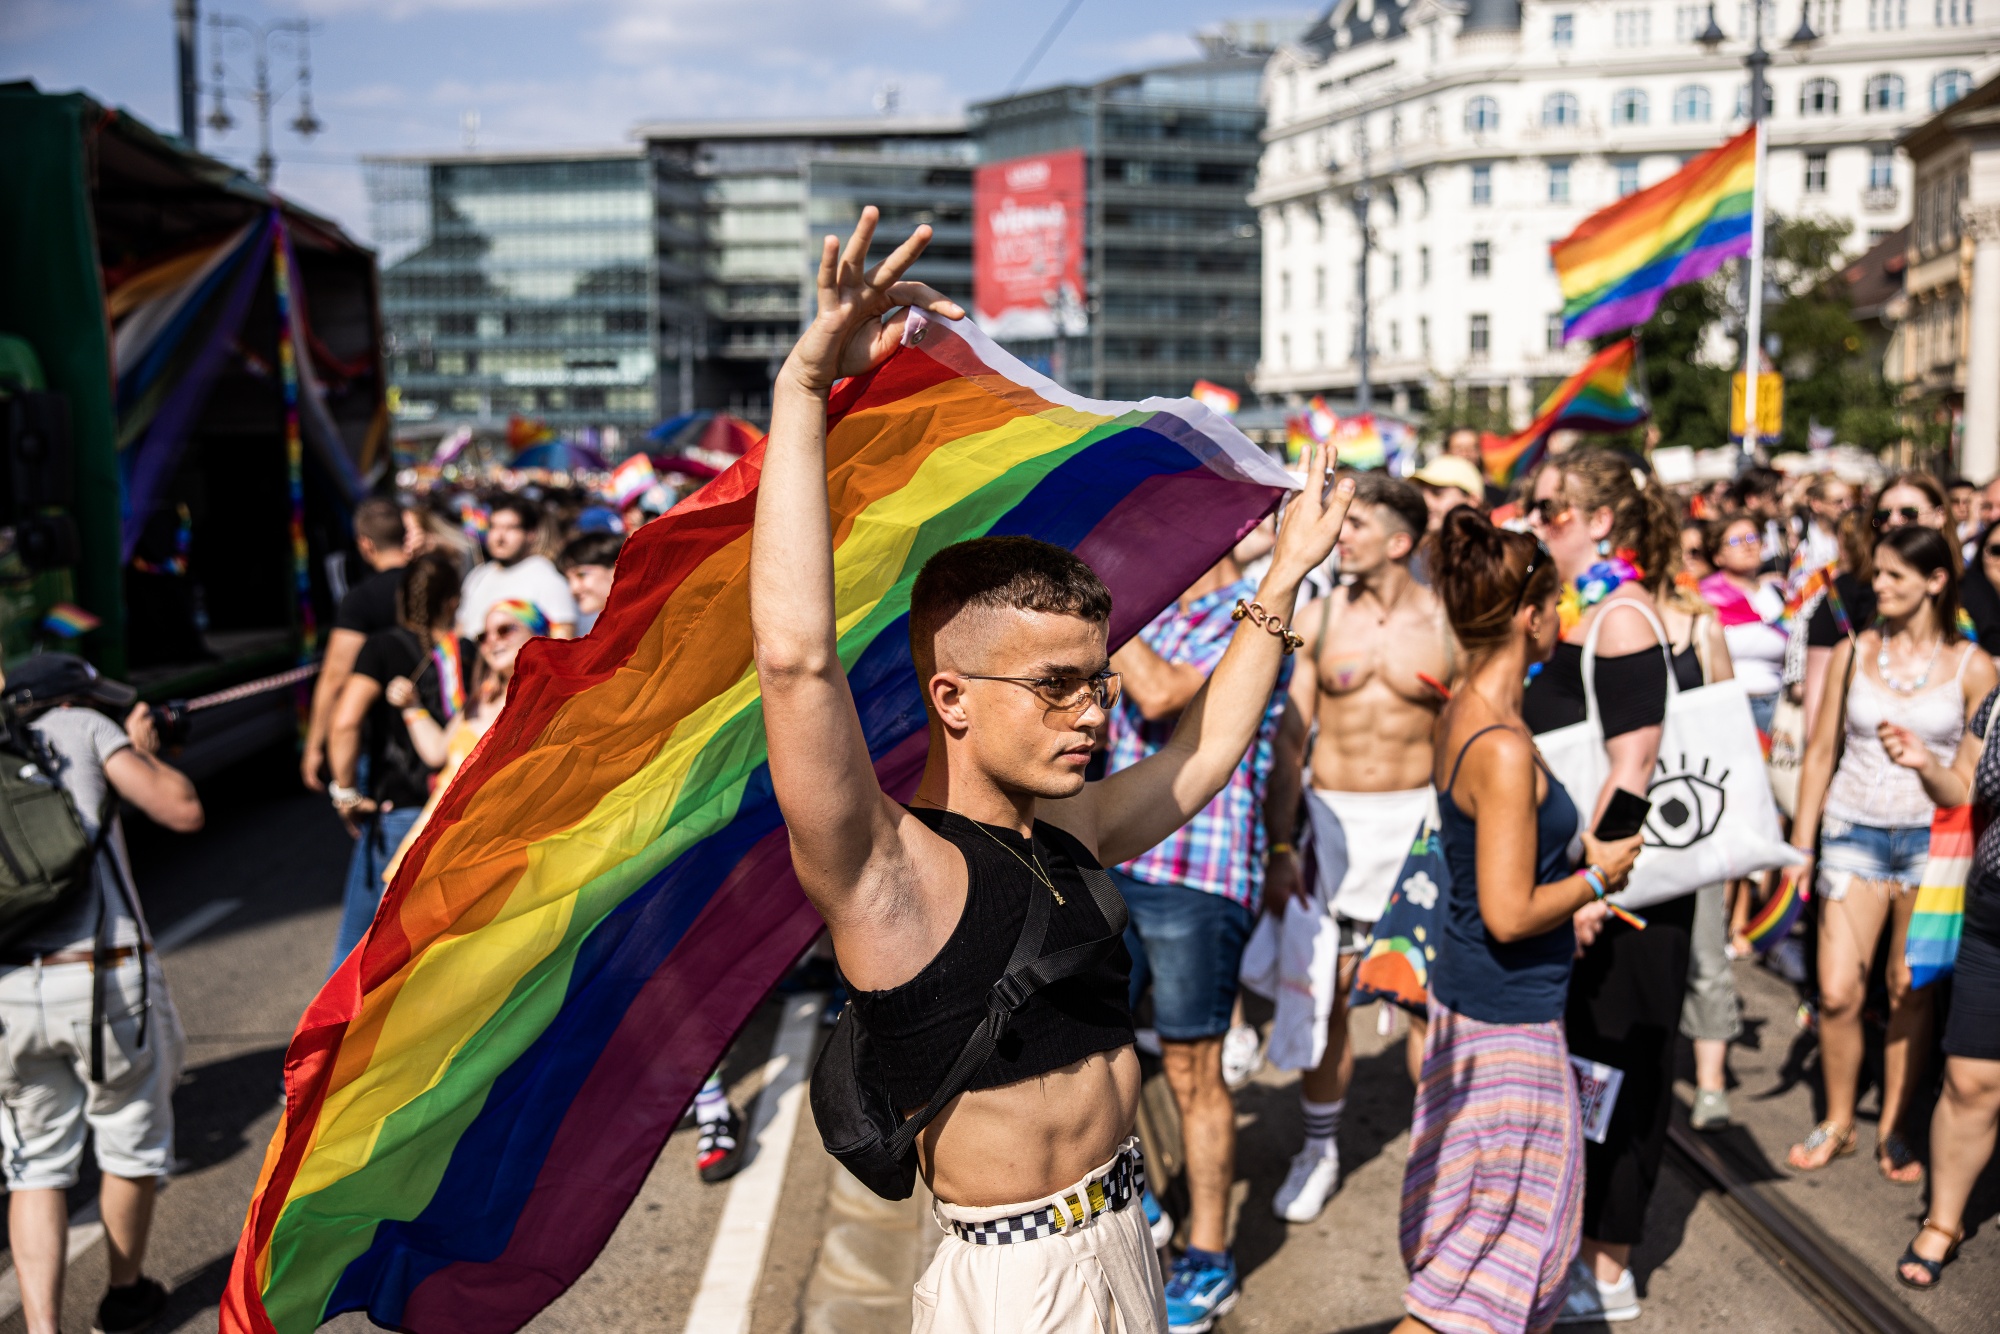 Hungary: Intensified Attack on LGBT People